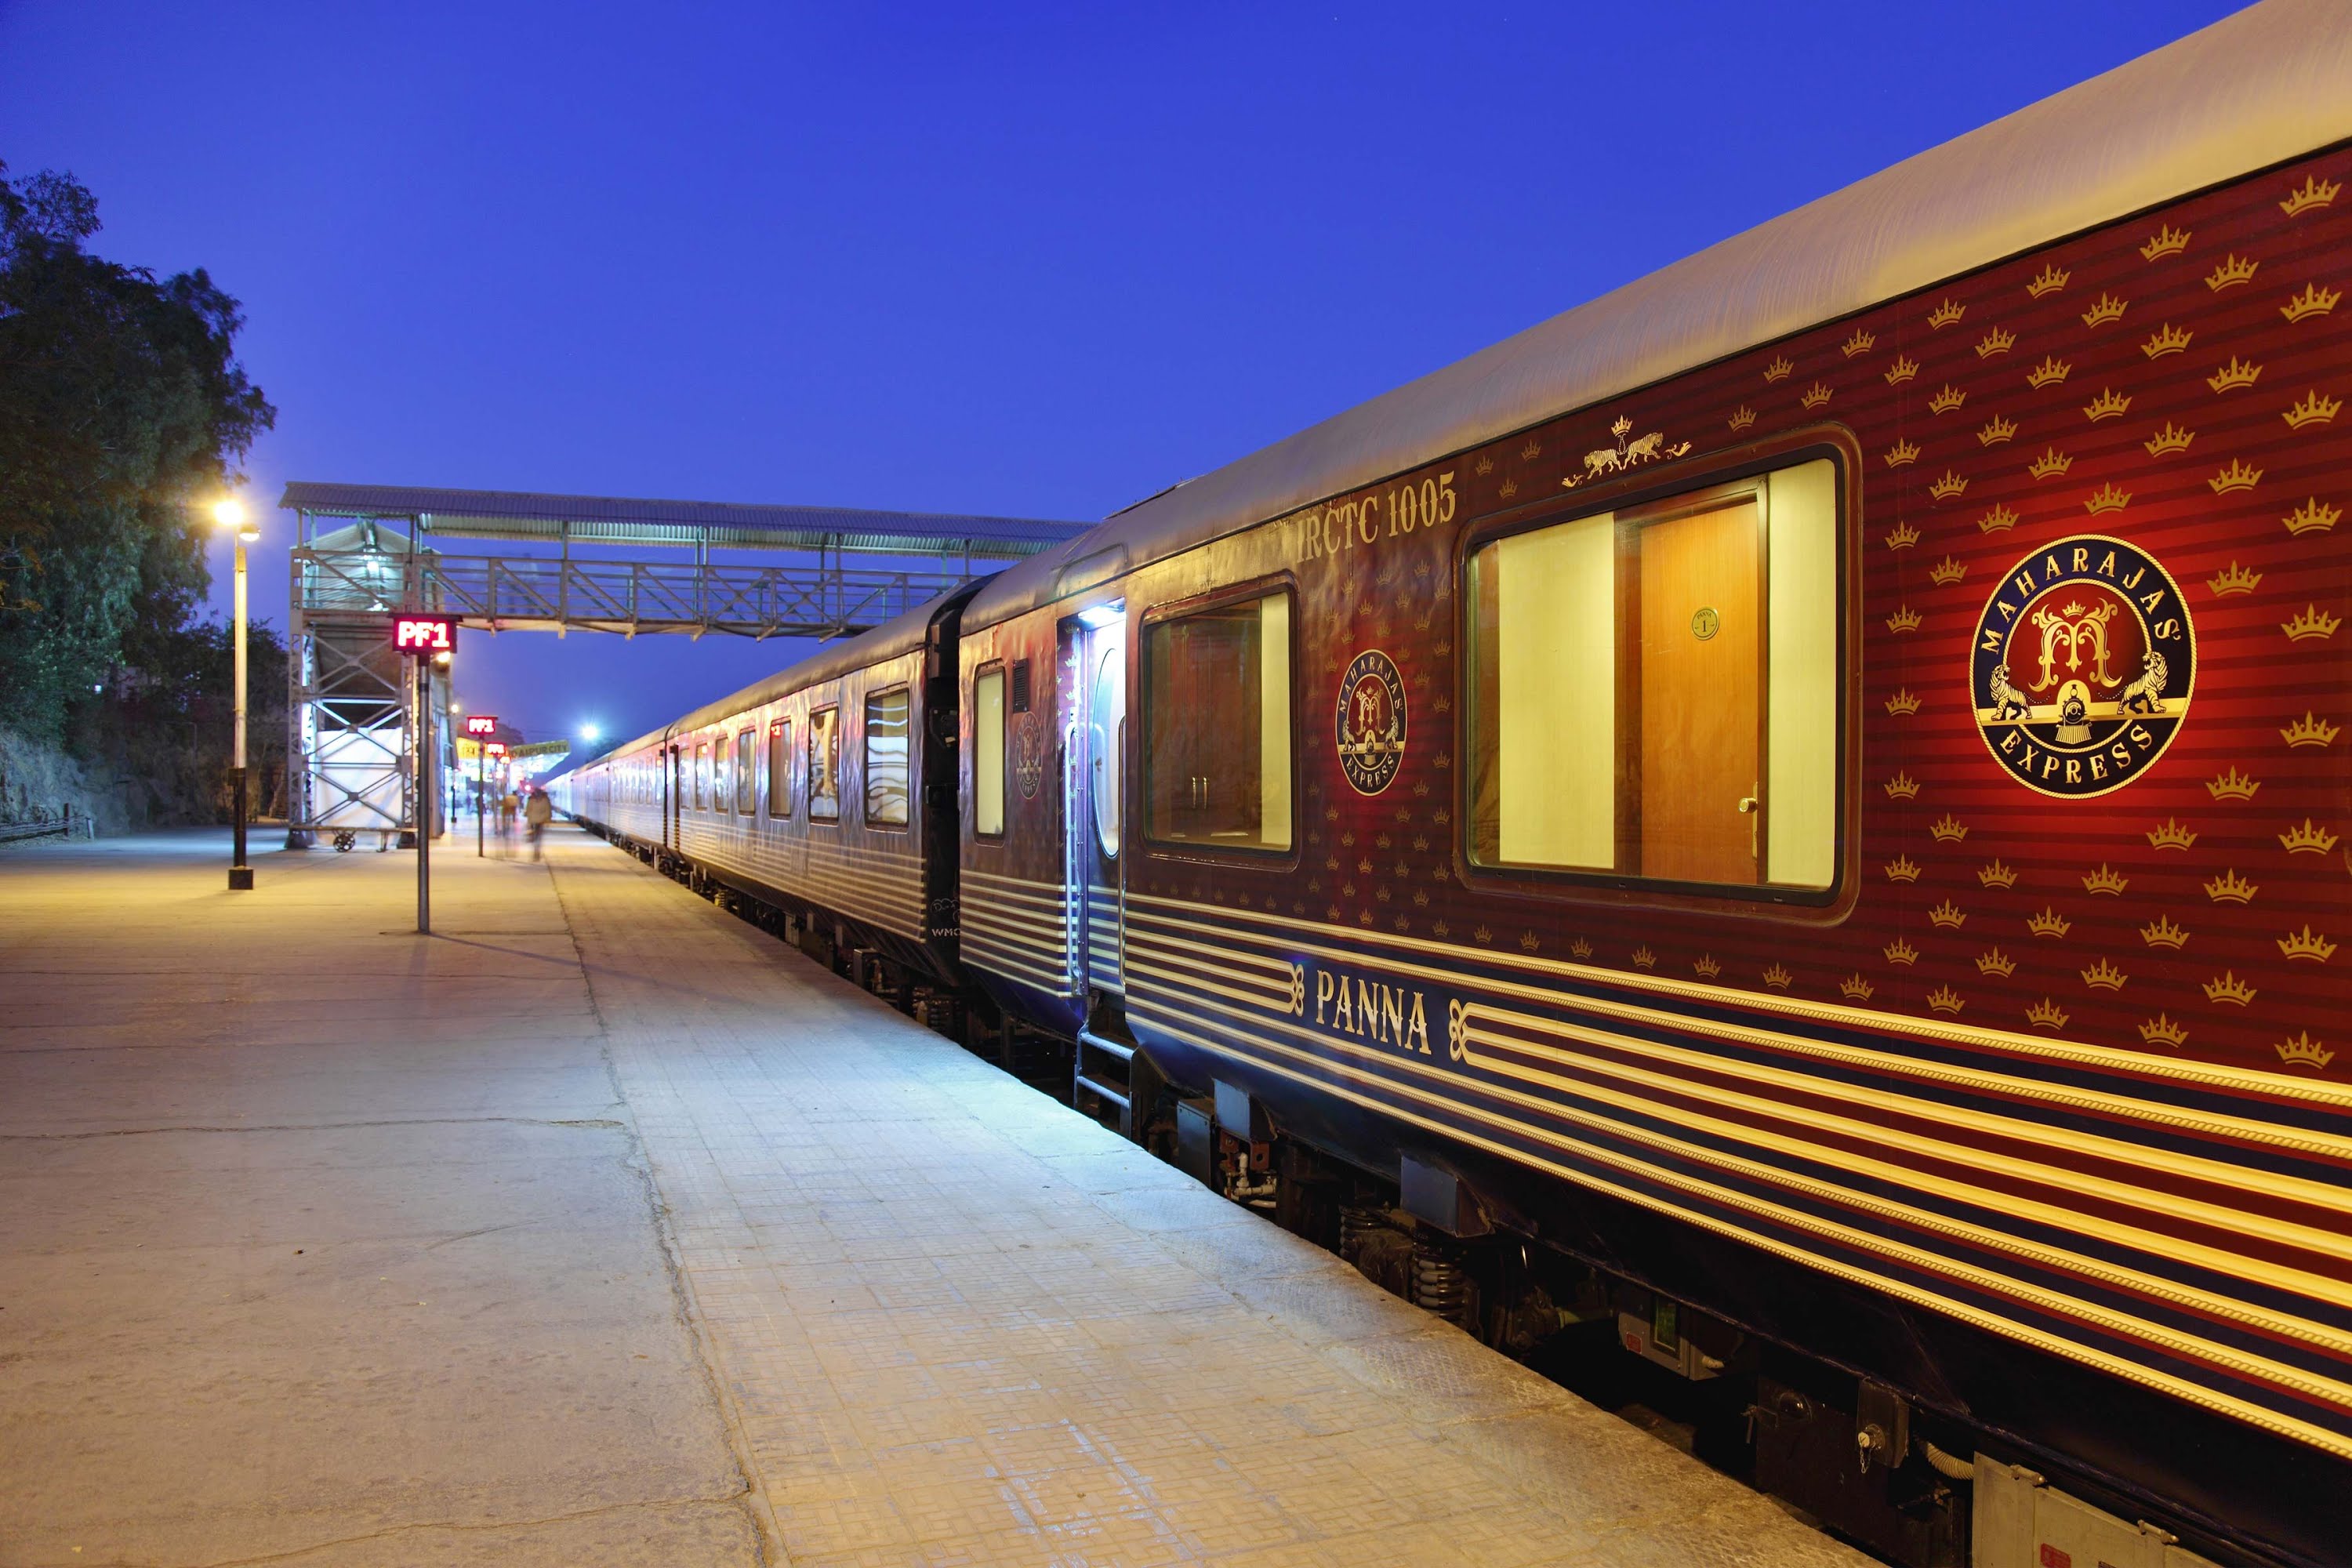 top 5 most luxurious trains in india, maharajas express route , maharaja express images , maharaja express fare from delhi to mumbai , maharaja express train ticket rates in indian rupees , maharaja express video , maharaja express speed , maharaja express wiki , maharaja express ticket price in rupees